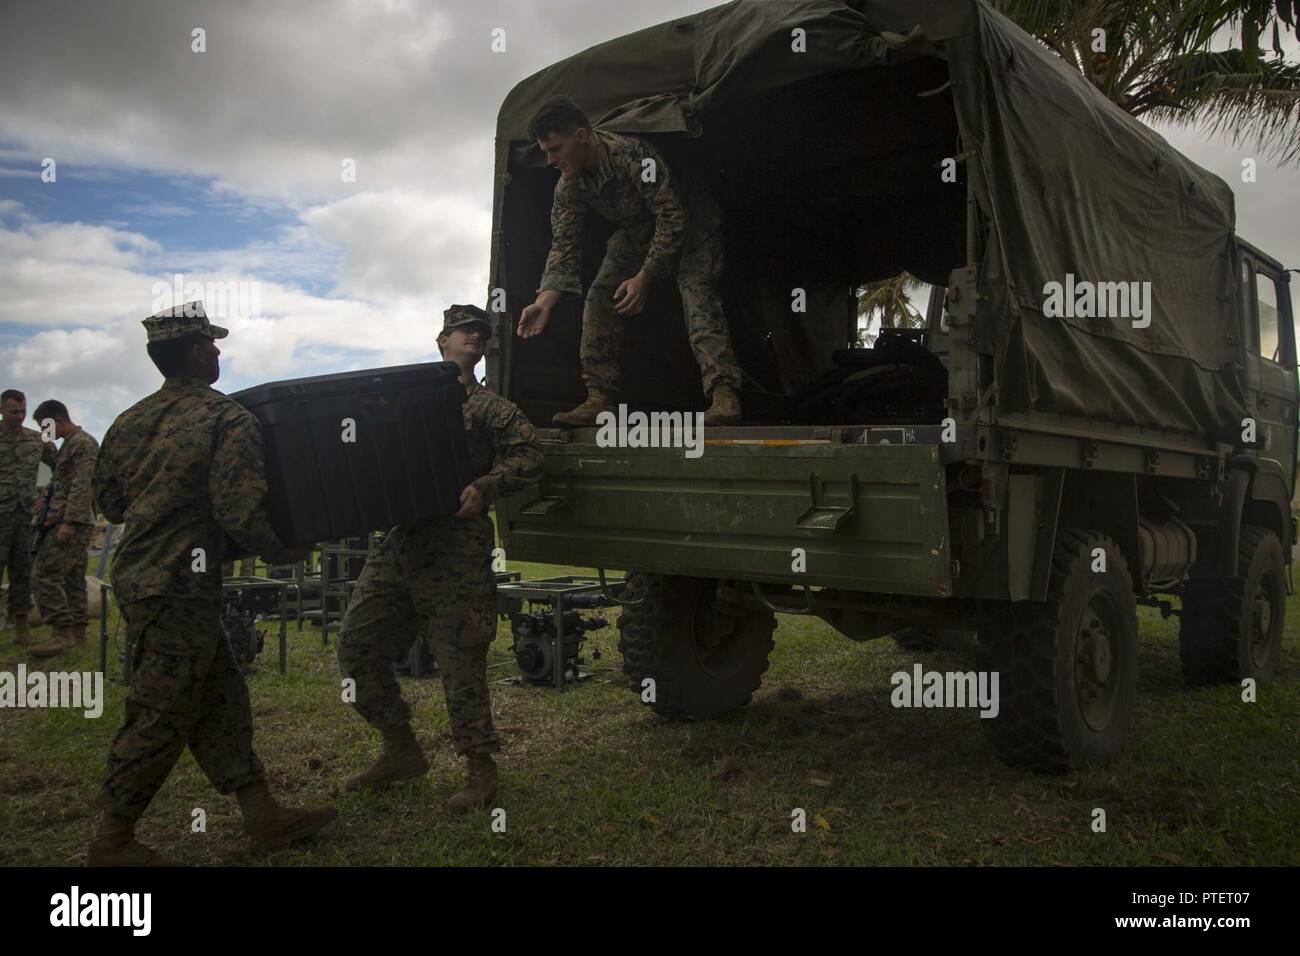 U.S. Marines with Task Force Koa Moana 17 load parts of a Light Weight Water Purification System onto a supply truck during Exercise TAFAKULA on Tongatapu Island, Tonga, July 17, 2017. Exercise TAFAKULA is designed to strengthen the military-to-military relations, infantry and combat training between Tonga’s His Majesty’s Armed Forces, French Army of New Caledonia, New Zealand Defense Force, and the United States Armed Forces. Stock Photo